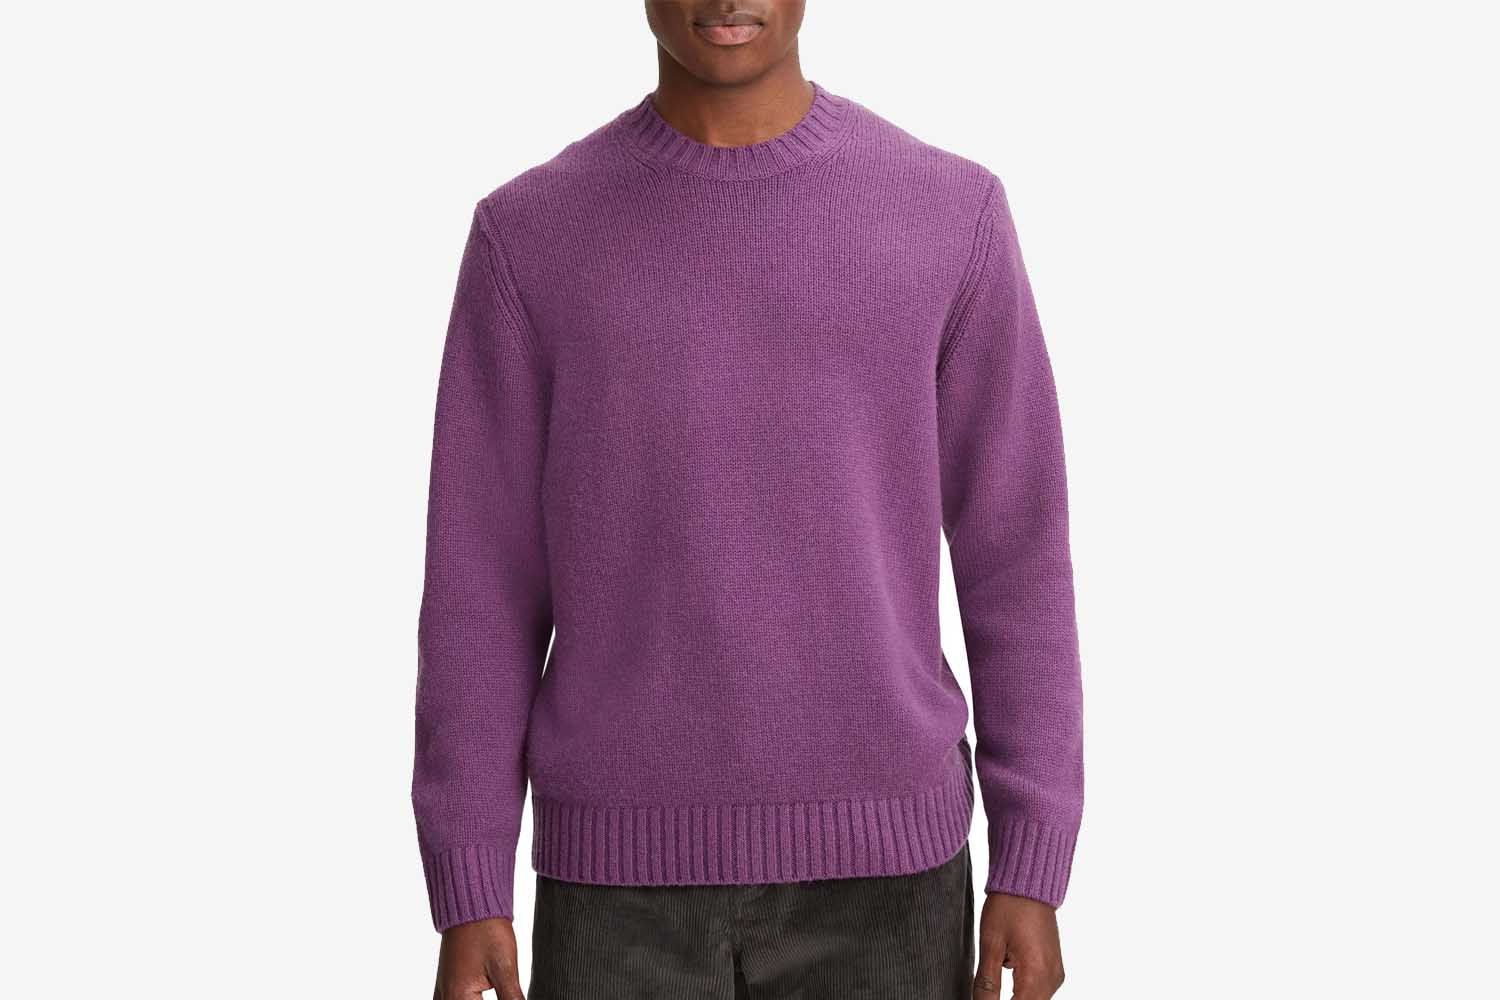 Vince Relaxed Fit Wool & Cashmere Sweater